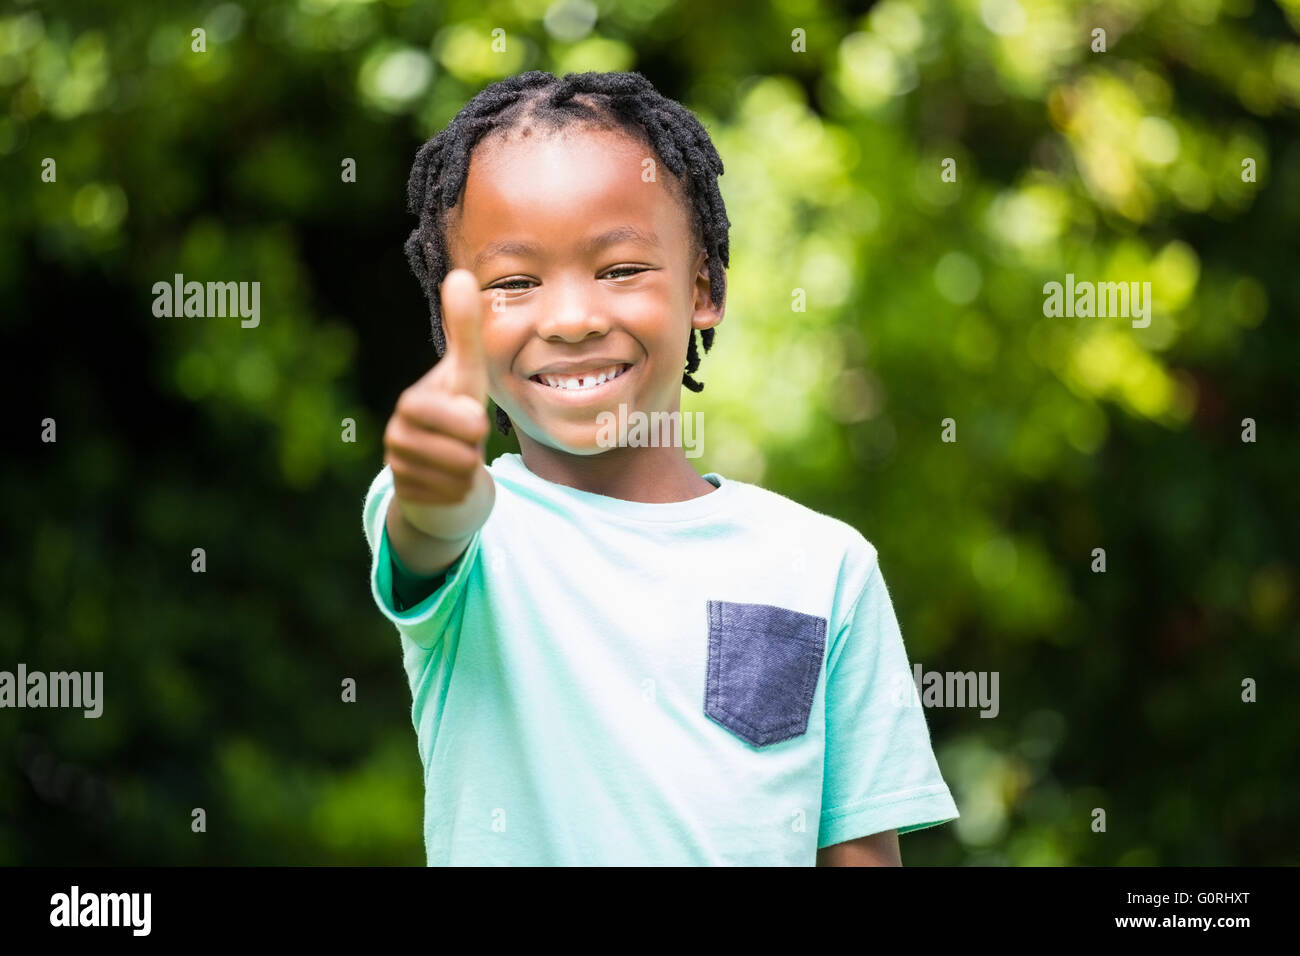 Smiling boy with Thumbs up Banque D'Images